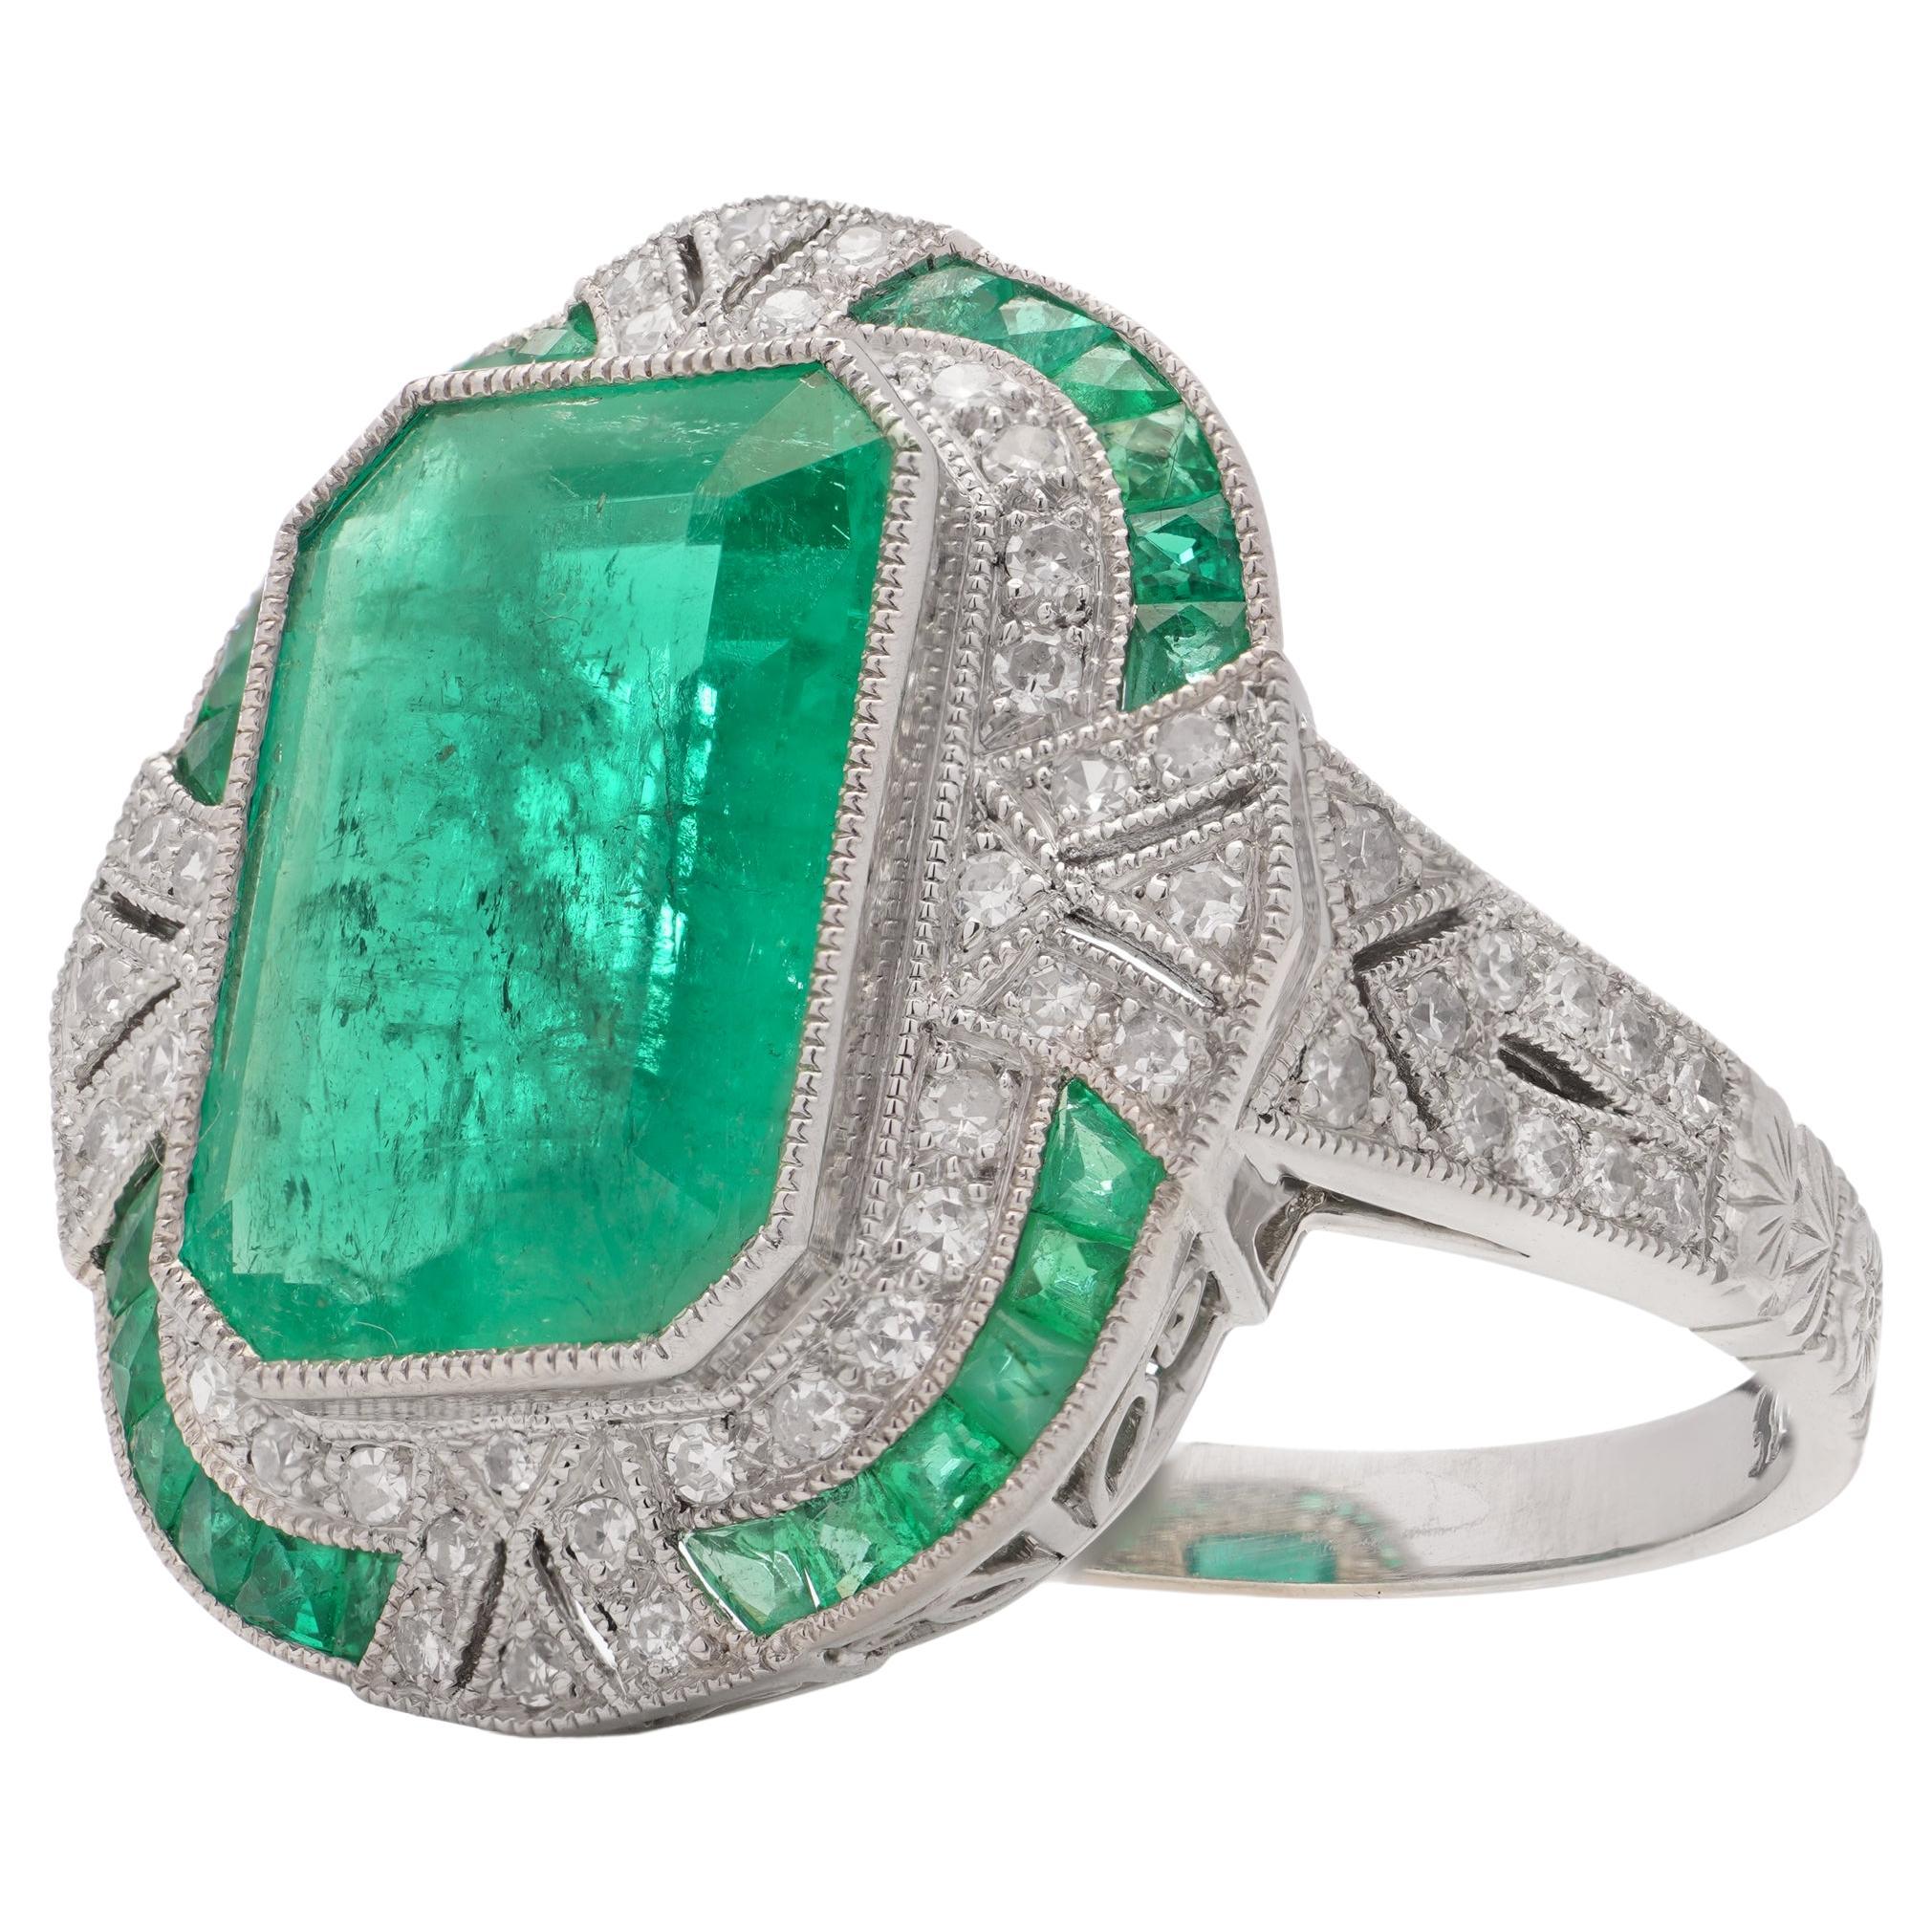 Platinum Art Deco-inspired 4.21 carats of Emerald fashion ring For Sale